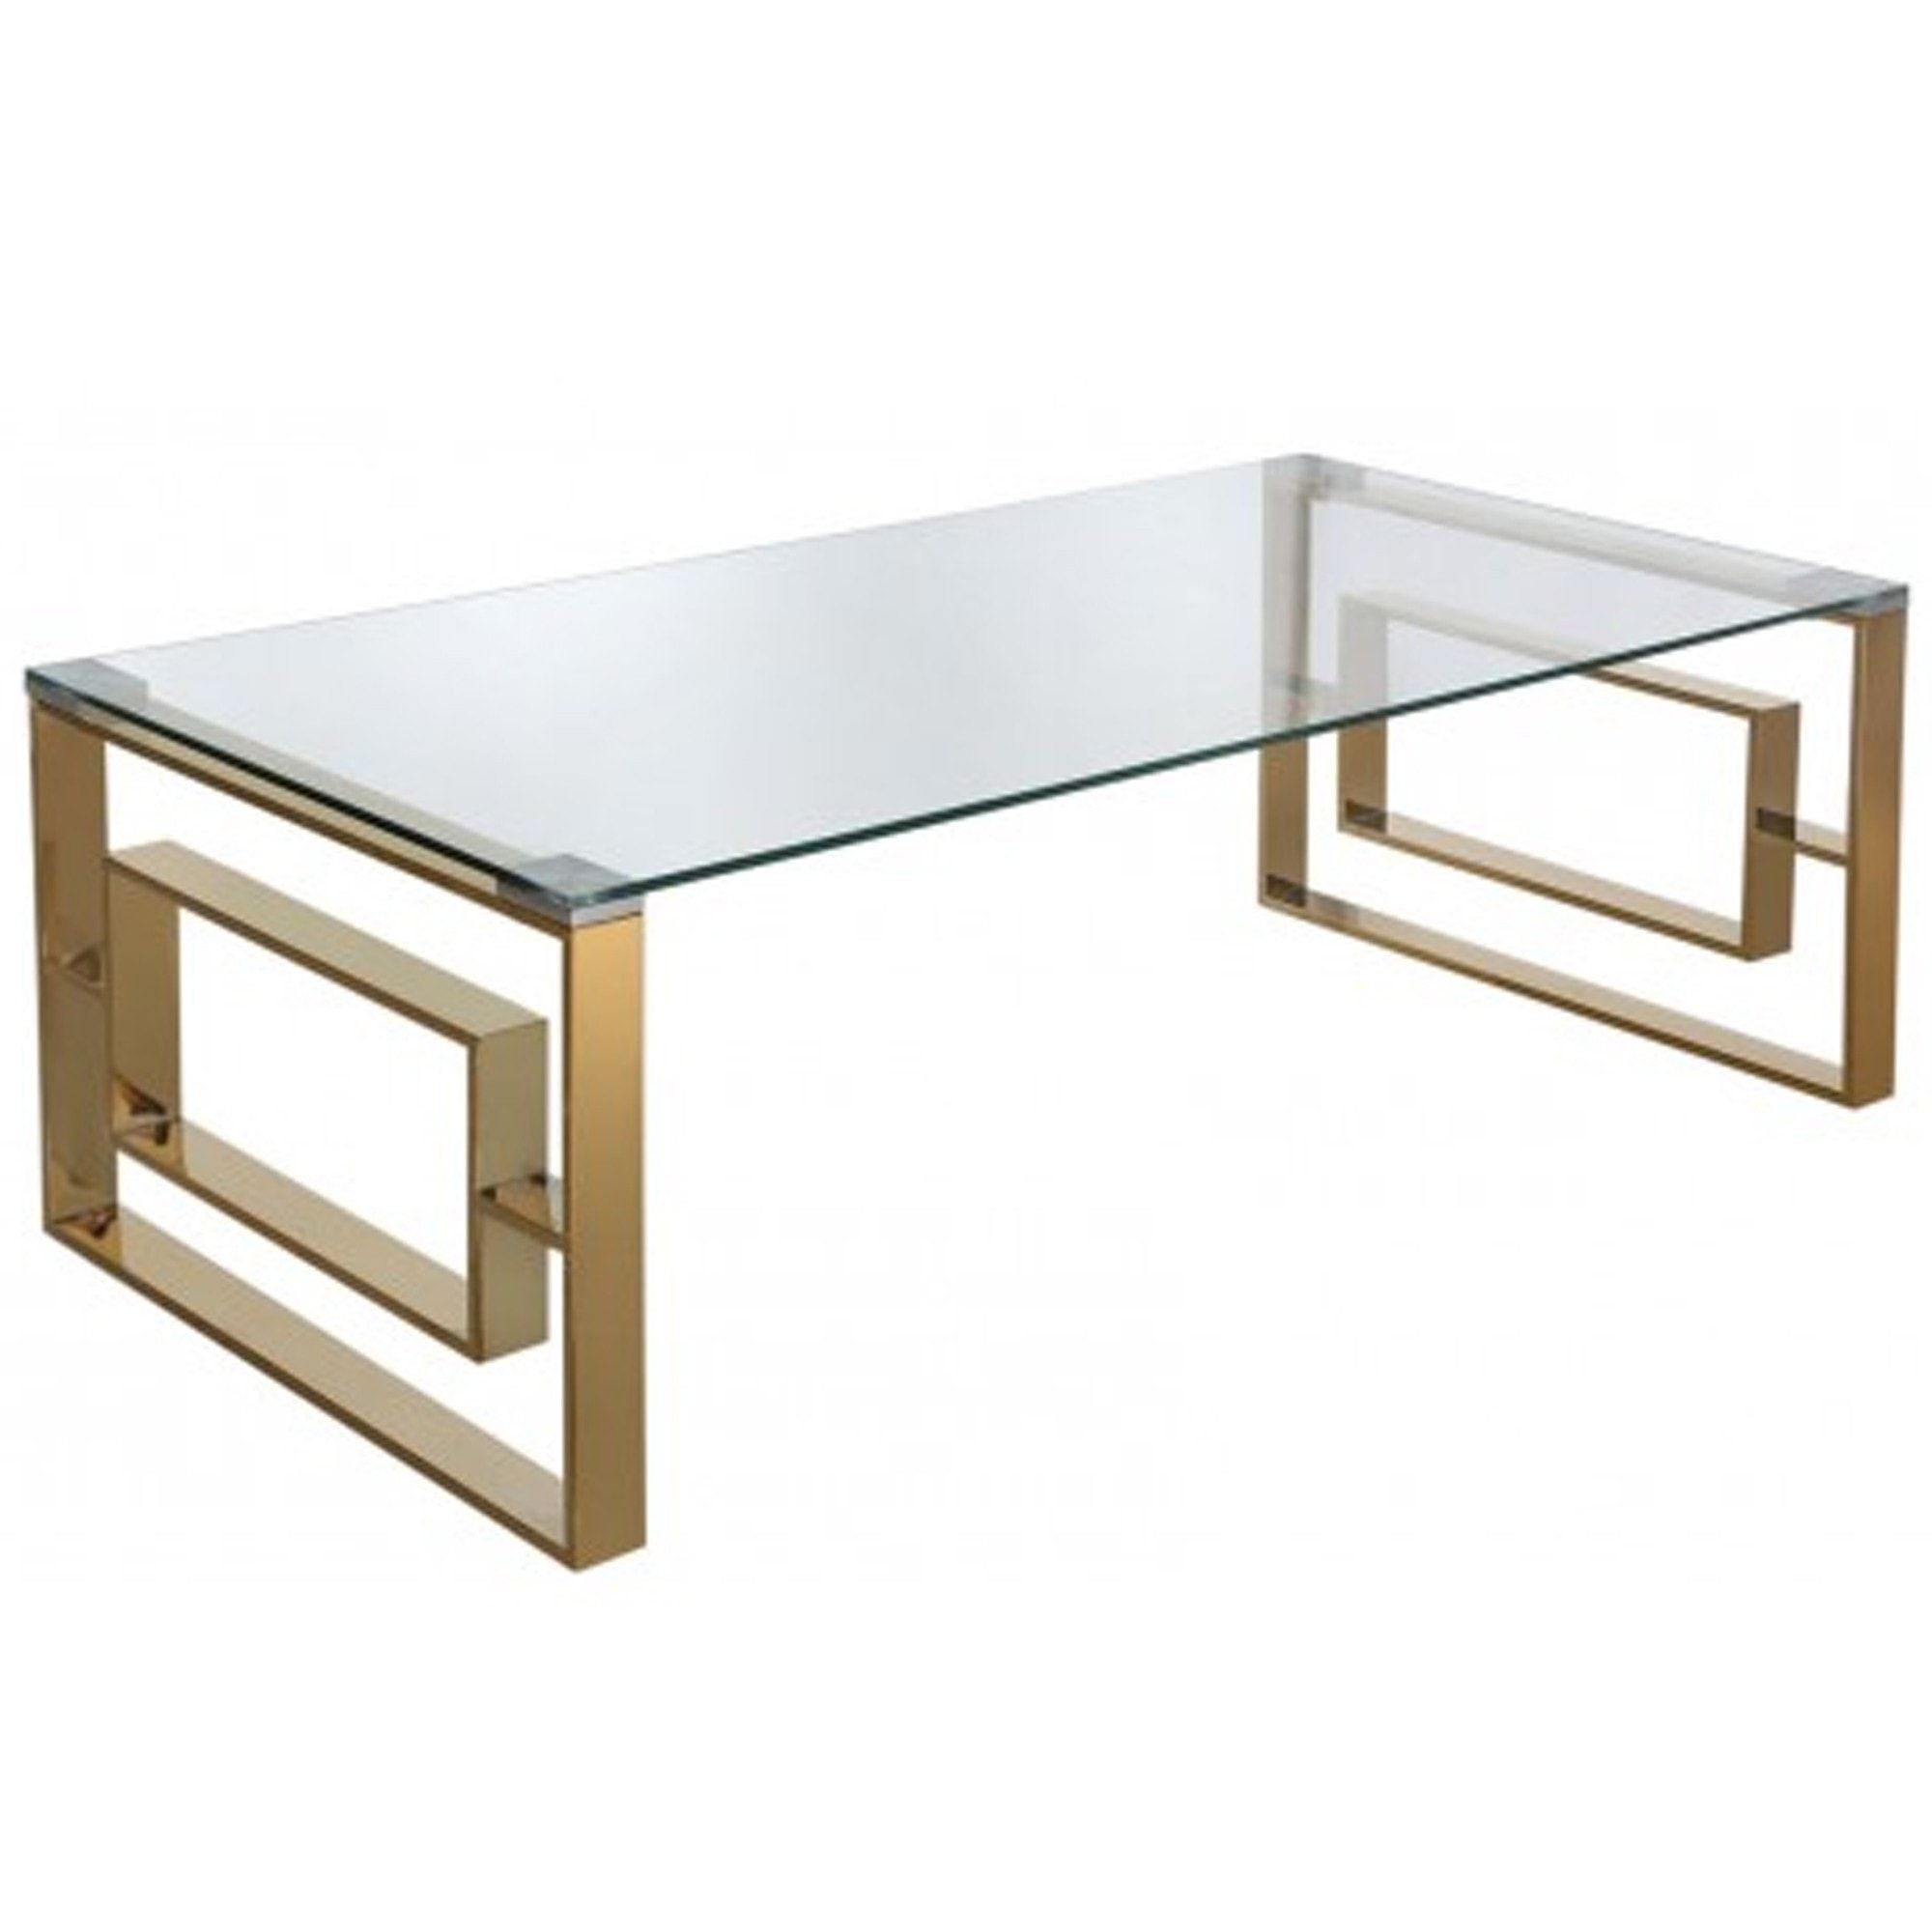 Apex Gold Metal Coffee Table | Gold Metal | Metal Coffee Table With Regard To Glossy Finished Metal Coffee Tables (Gallery 10 of 20)